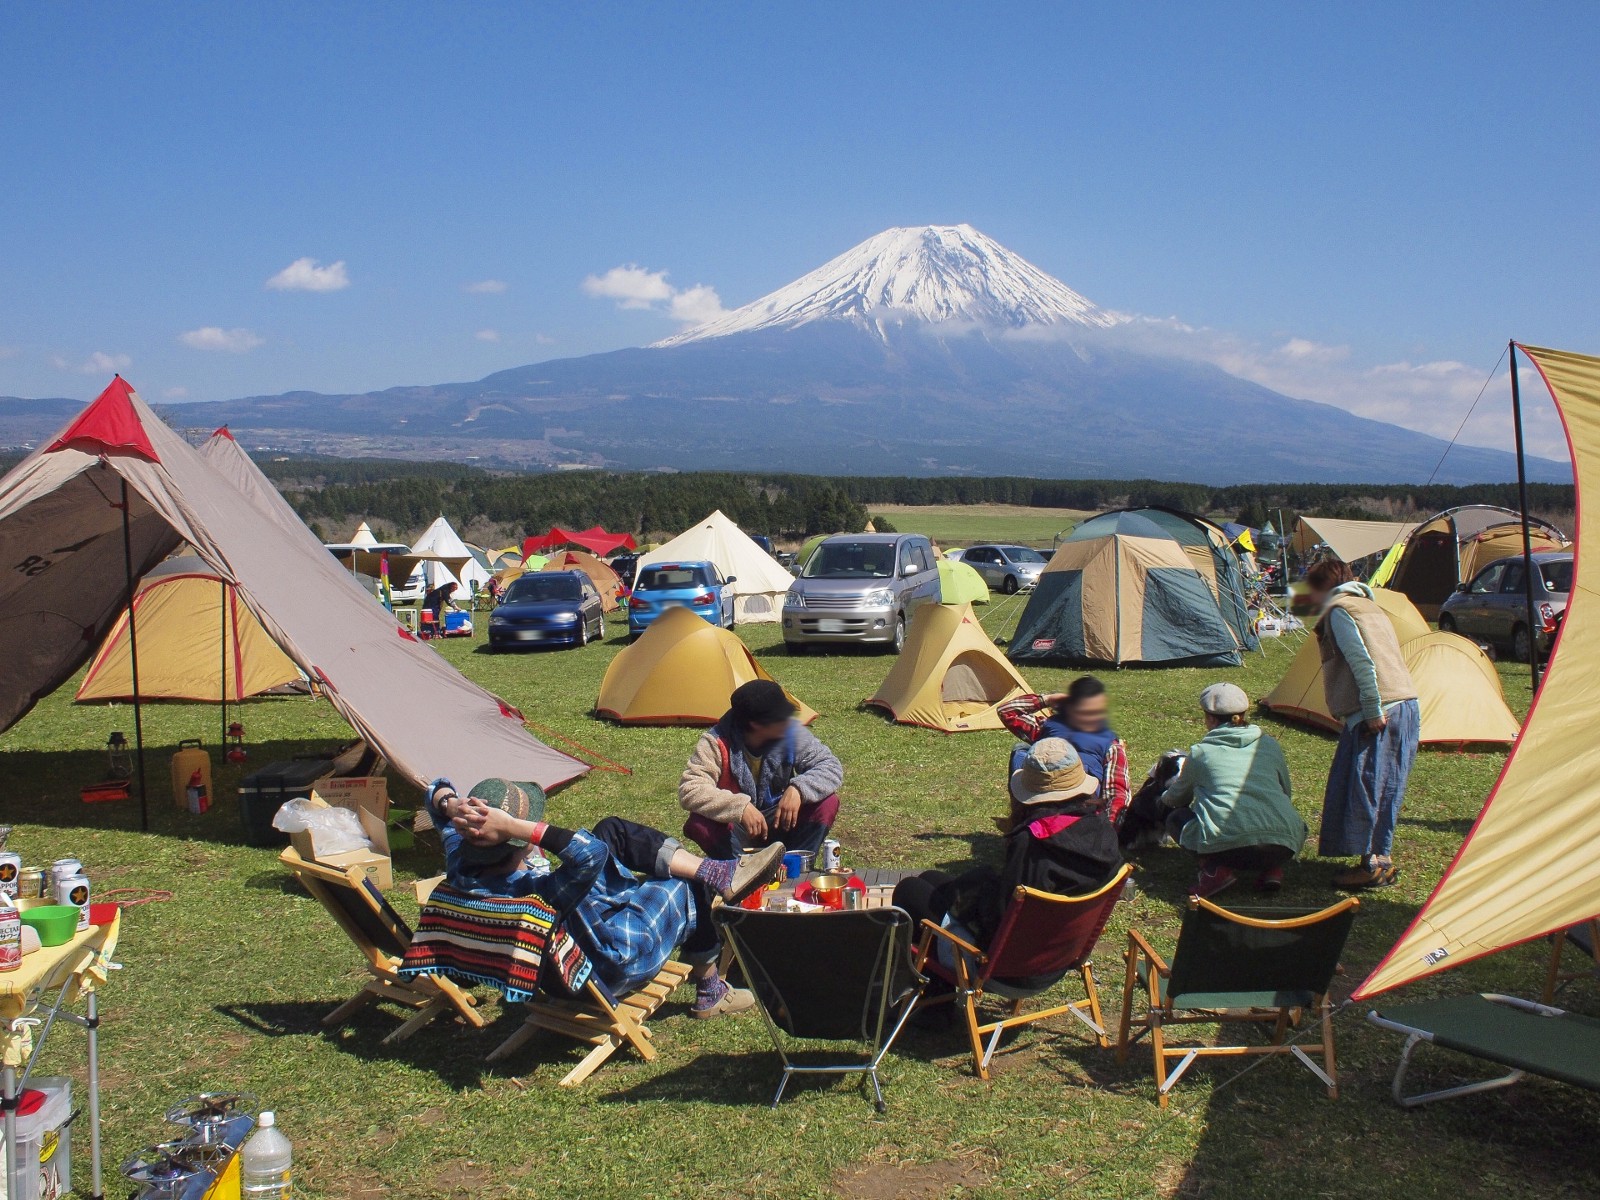 Camping on the foot of Mt Fuji